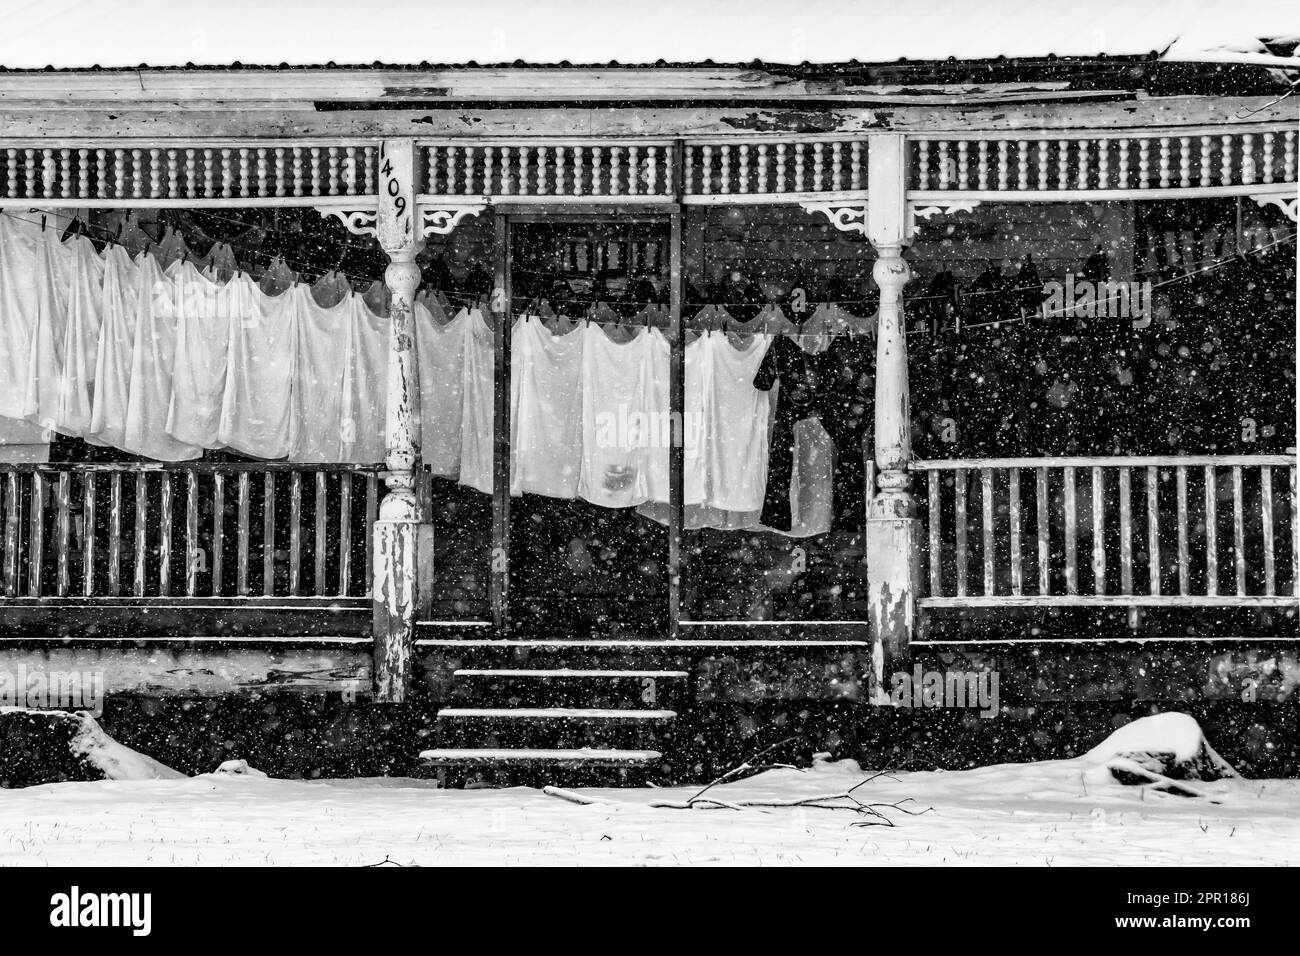 Amish laundry drying during a cold and snowy day on a porch in Central Michigan, USA [No property release; editorial licensing only] Stock Photo